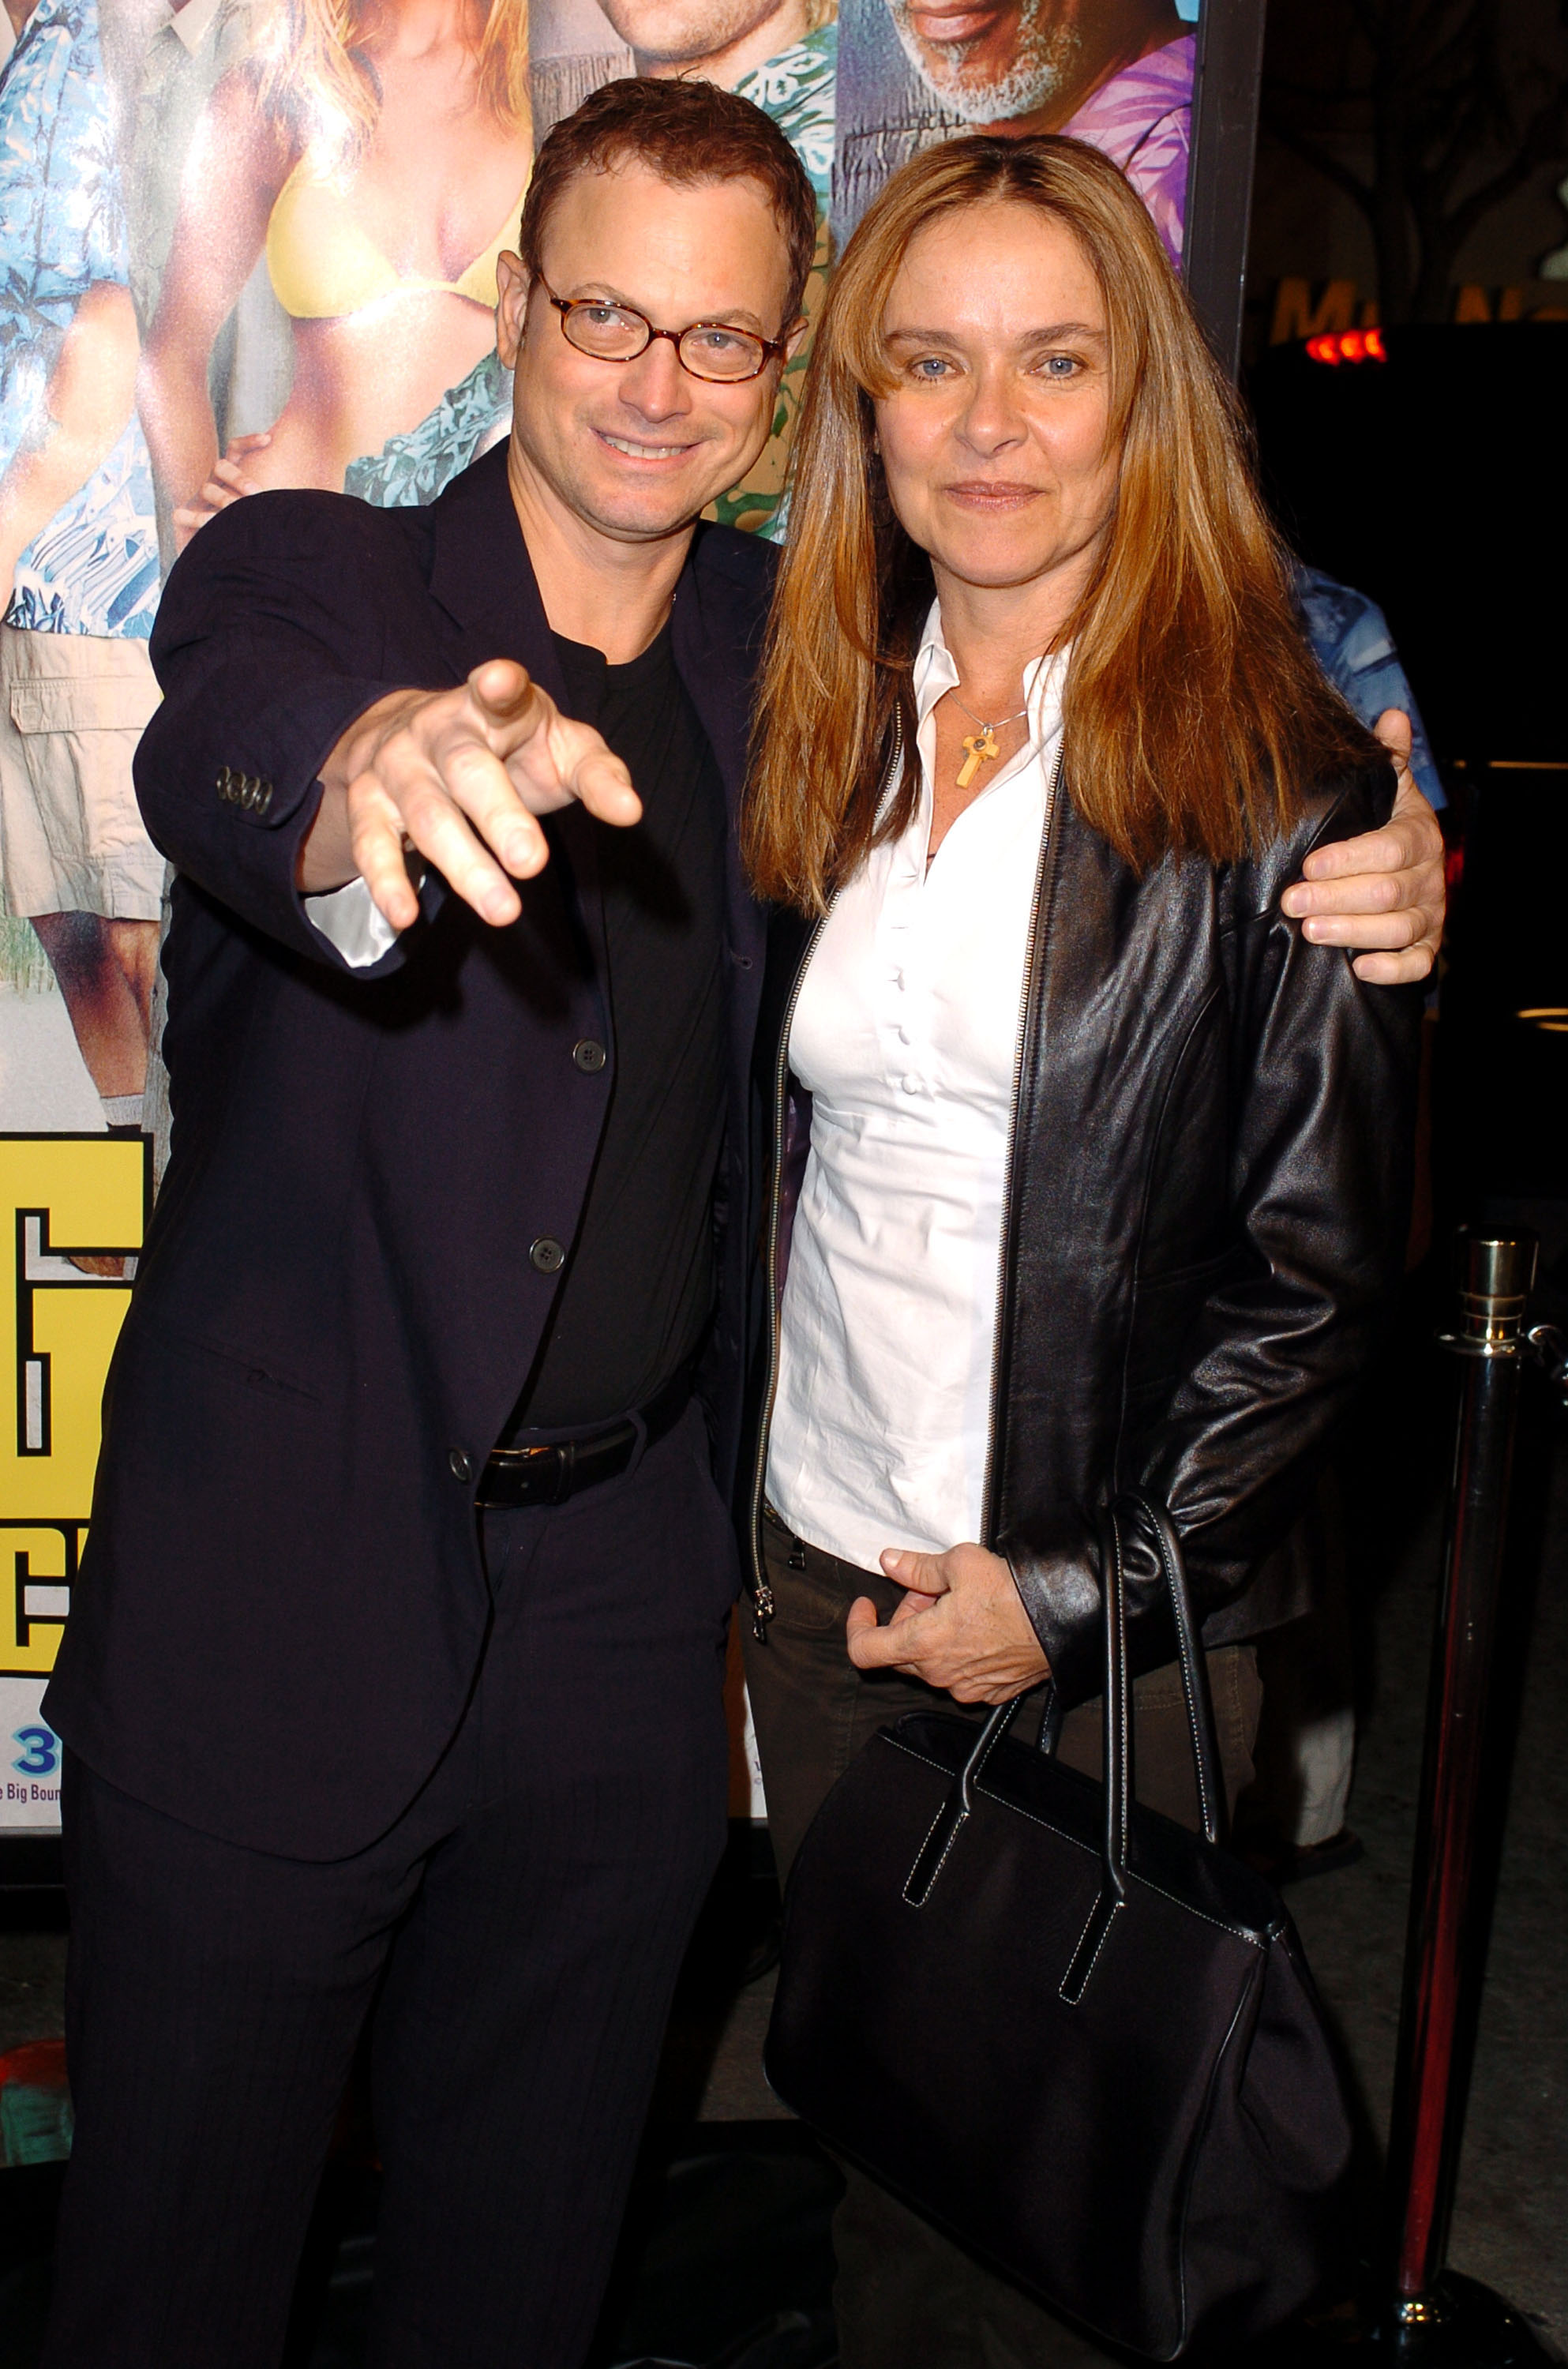 Gary Sinise and Moira Harris at the premiere of "The Big Bounce" at the Mann Village Theater in Westwood, California, on January 29, 2004. | Source: Getty Images